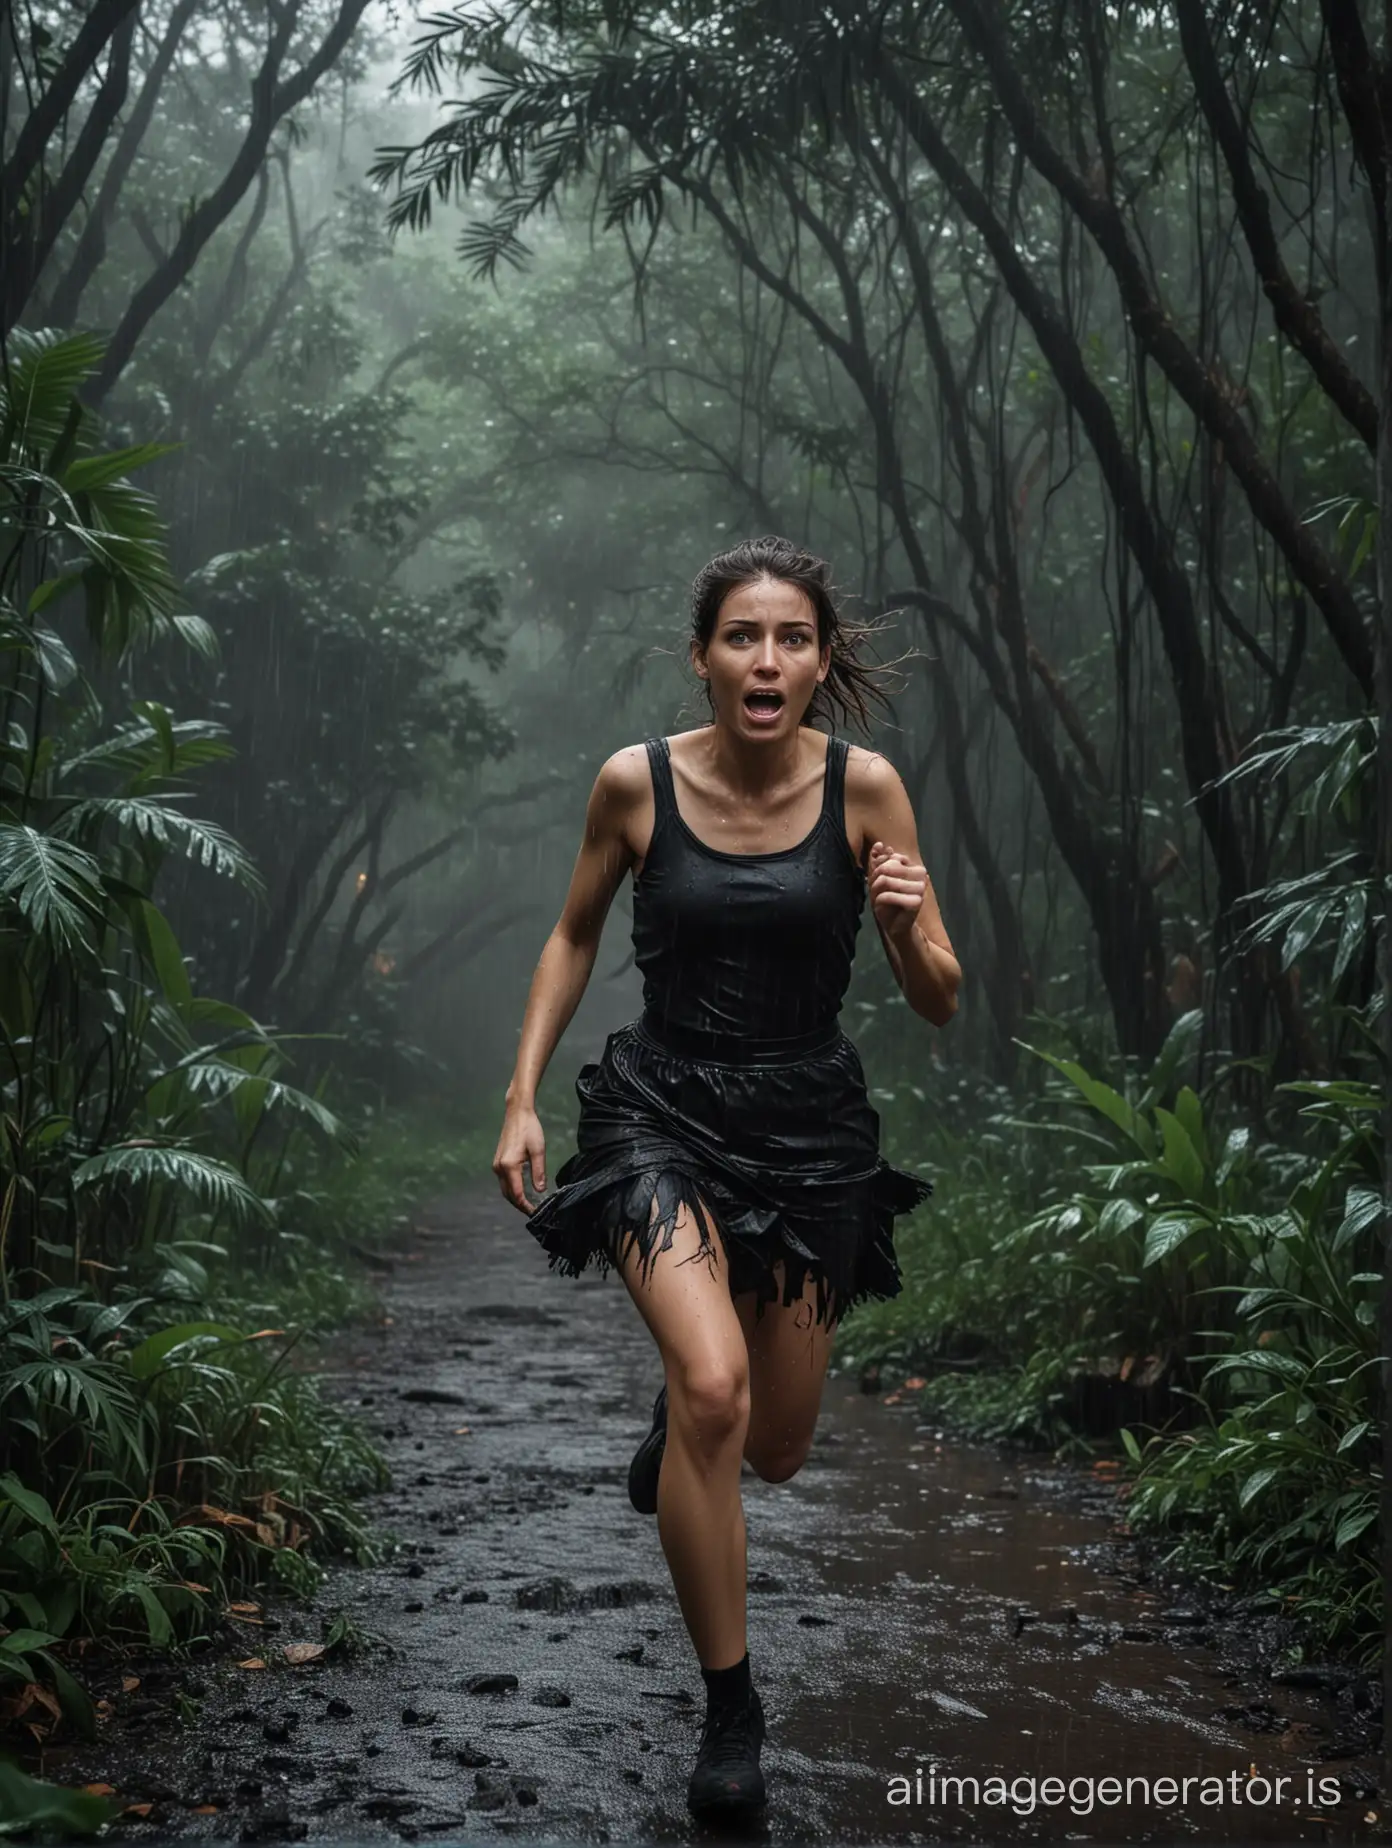 A scared adult girl running through jungle at rainy winter night, wearing torn black tops and skirt